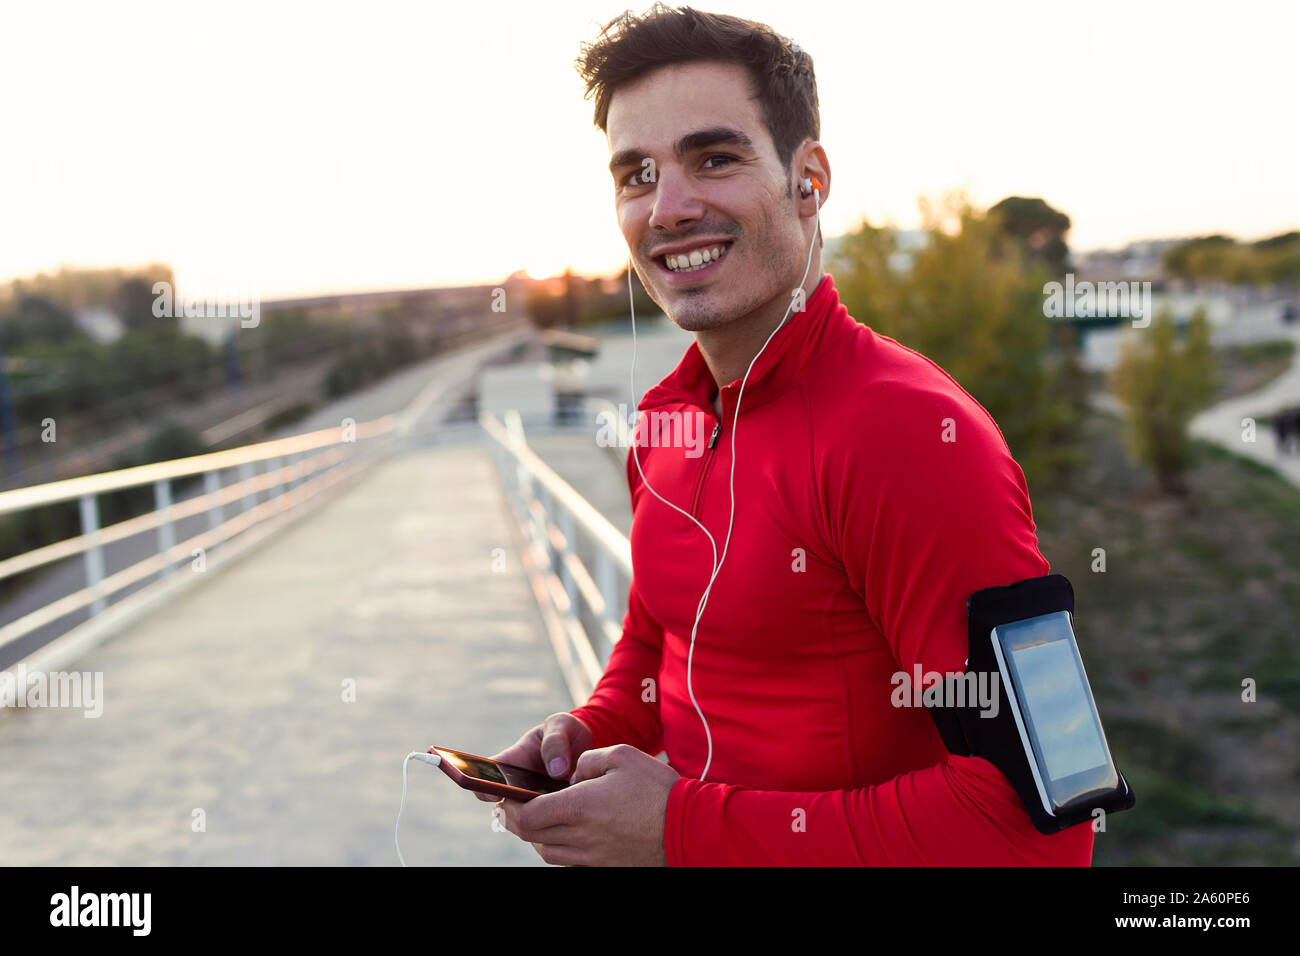 Jogger with smartphone in arm pocket, holding smartphone and looking at camera Stock Photo